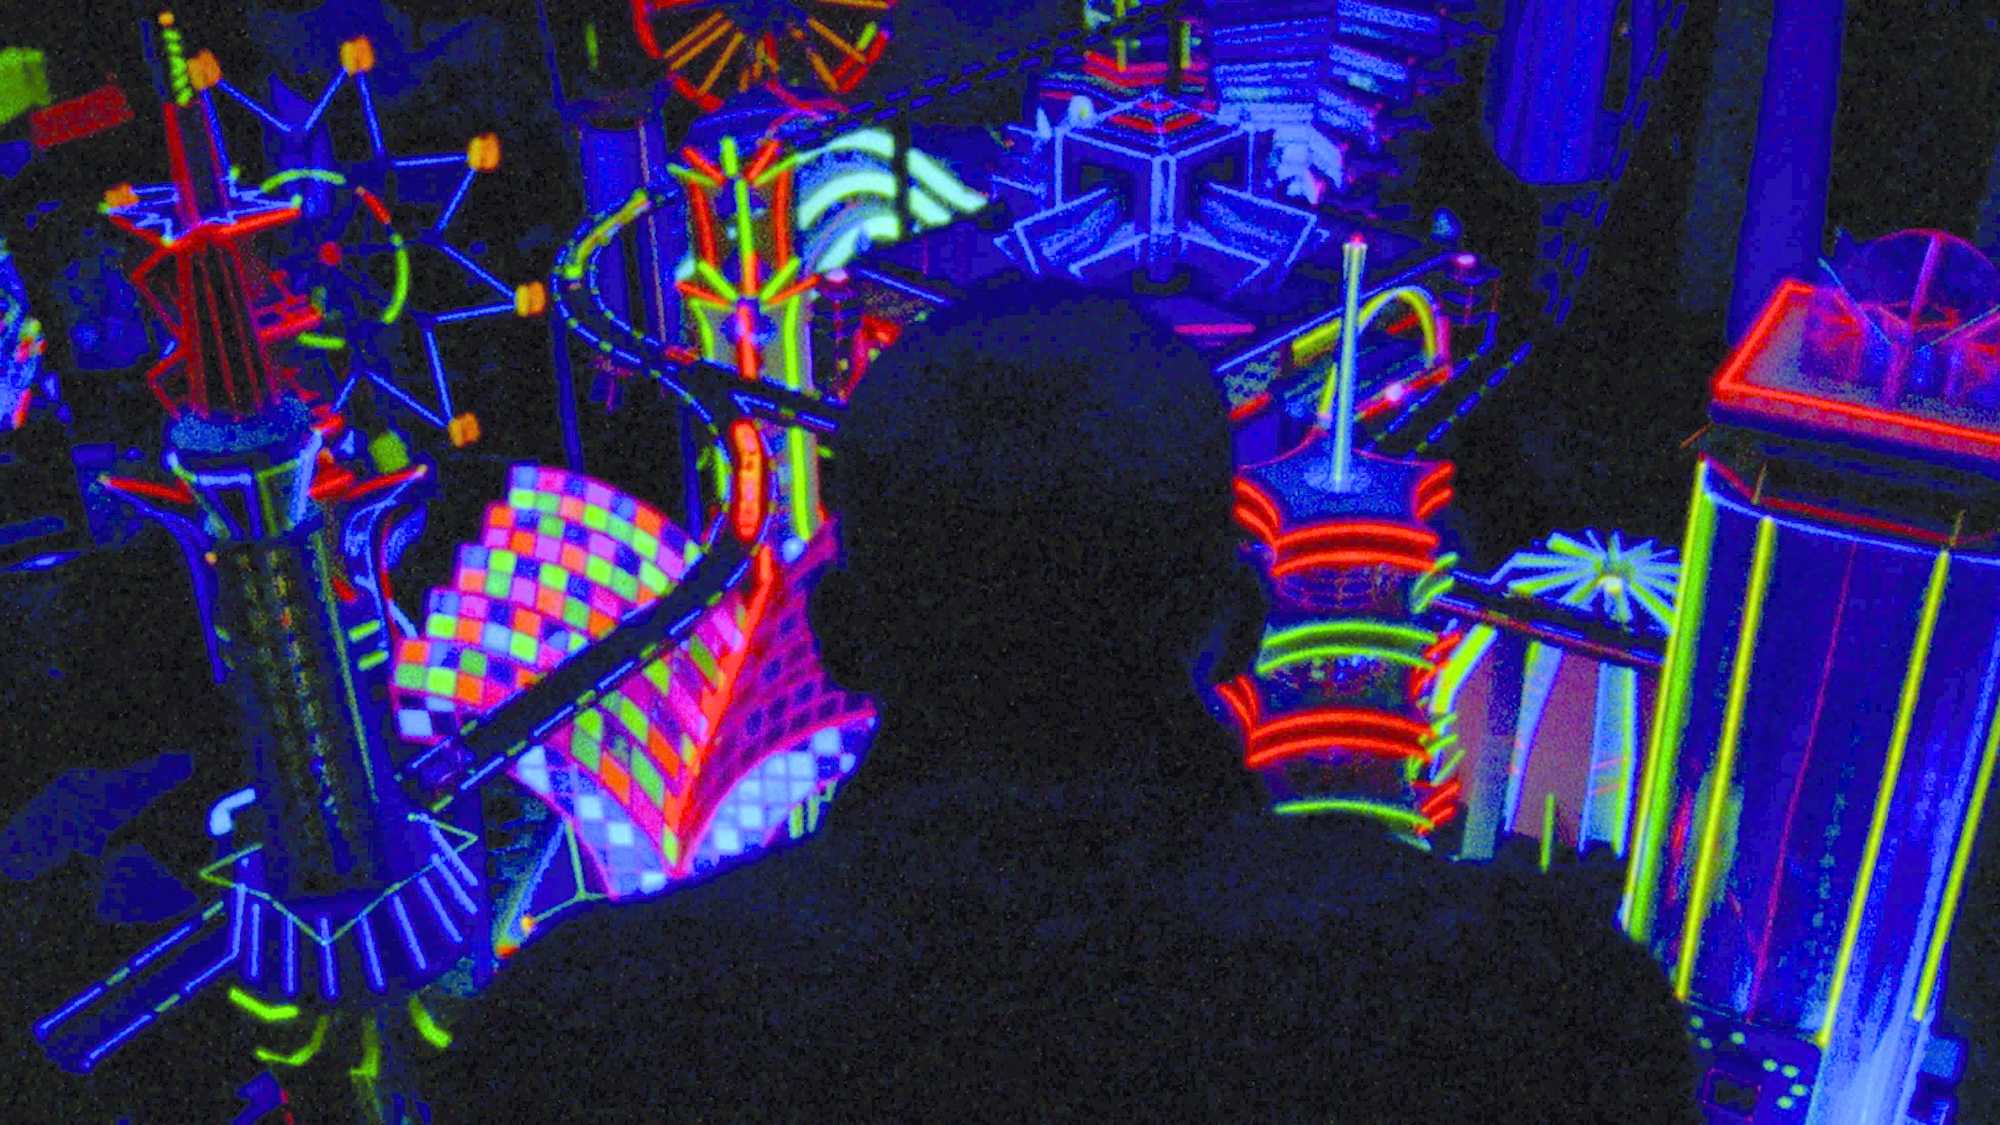 Enter the Void (image 1)